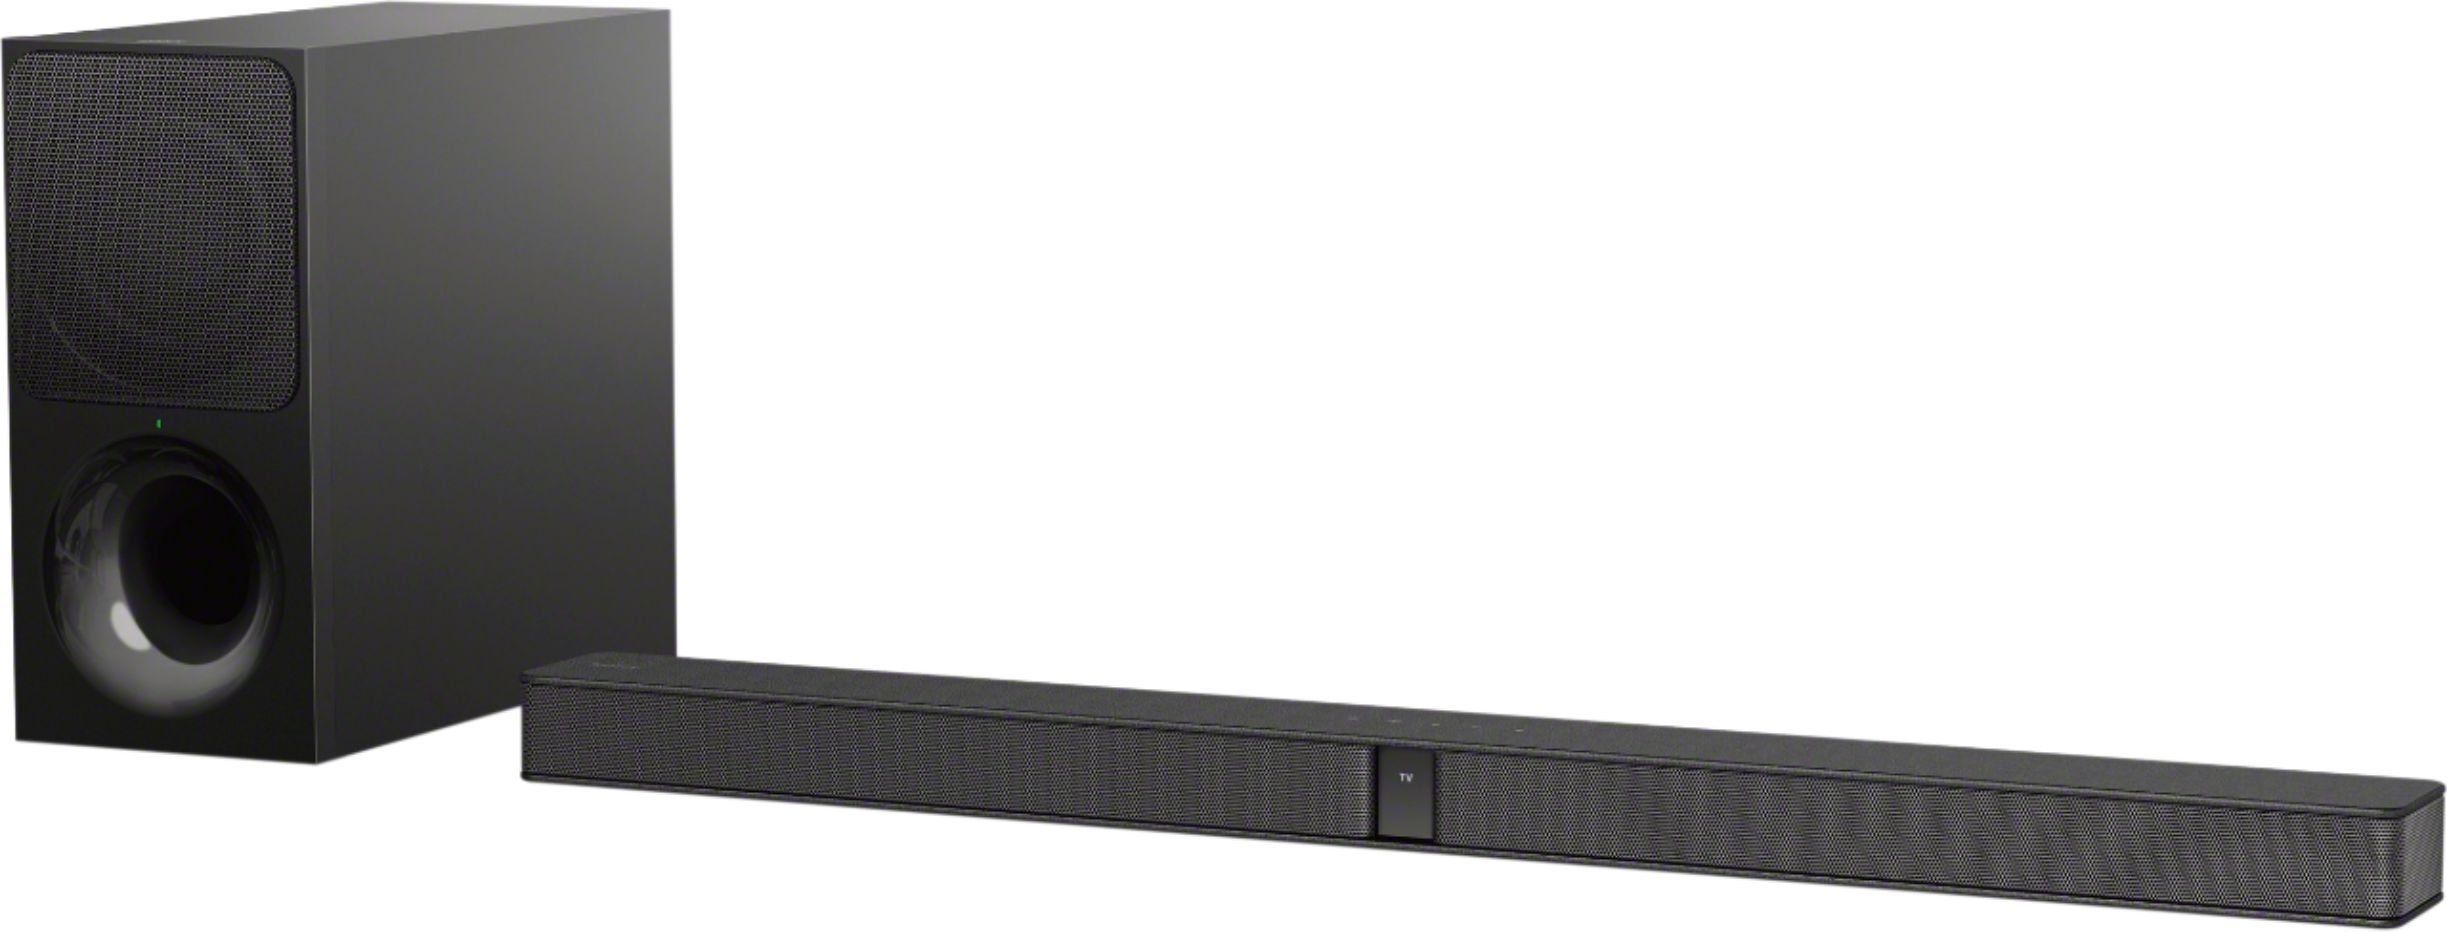 Sony 2.1-Channel Soundbar System with Wireless Subwoofer and Digital Amplifier Black - Best Buy